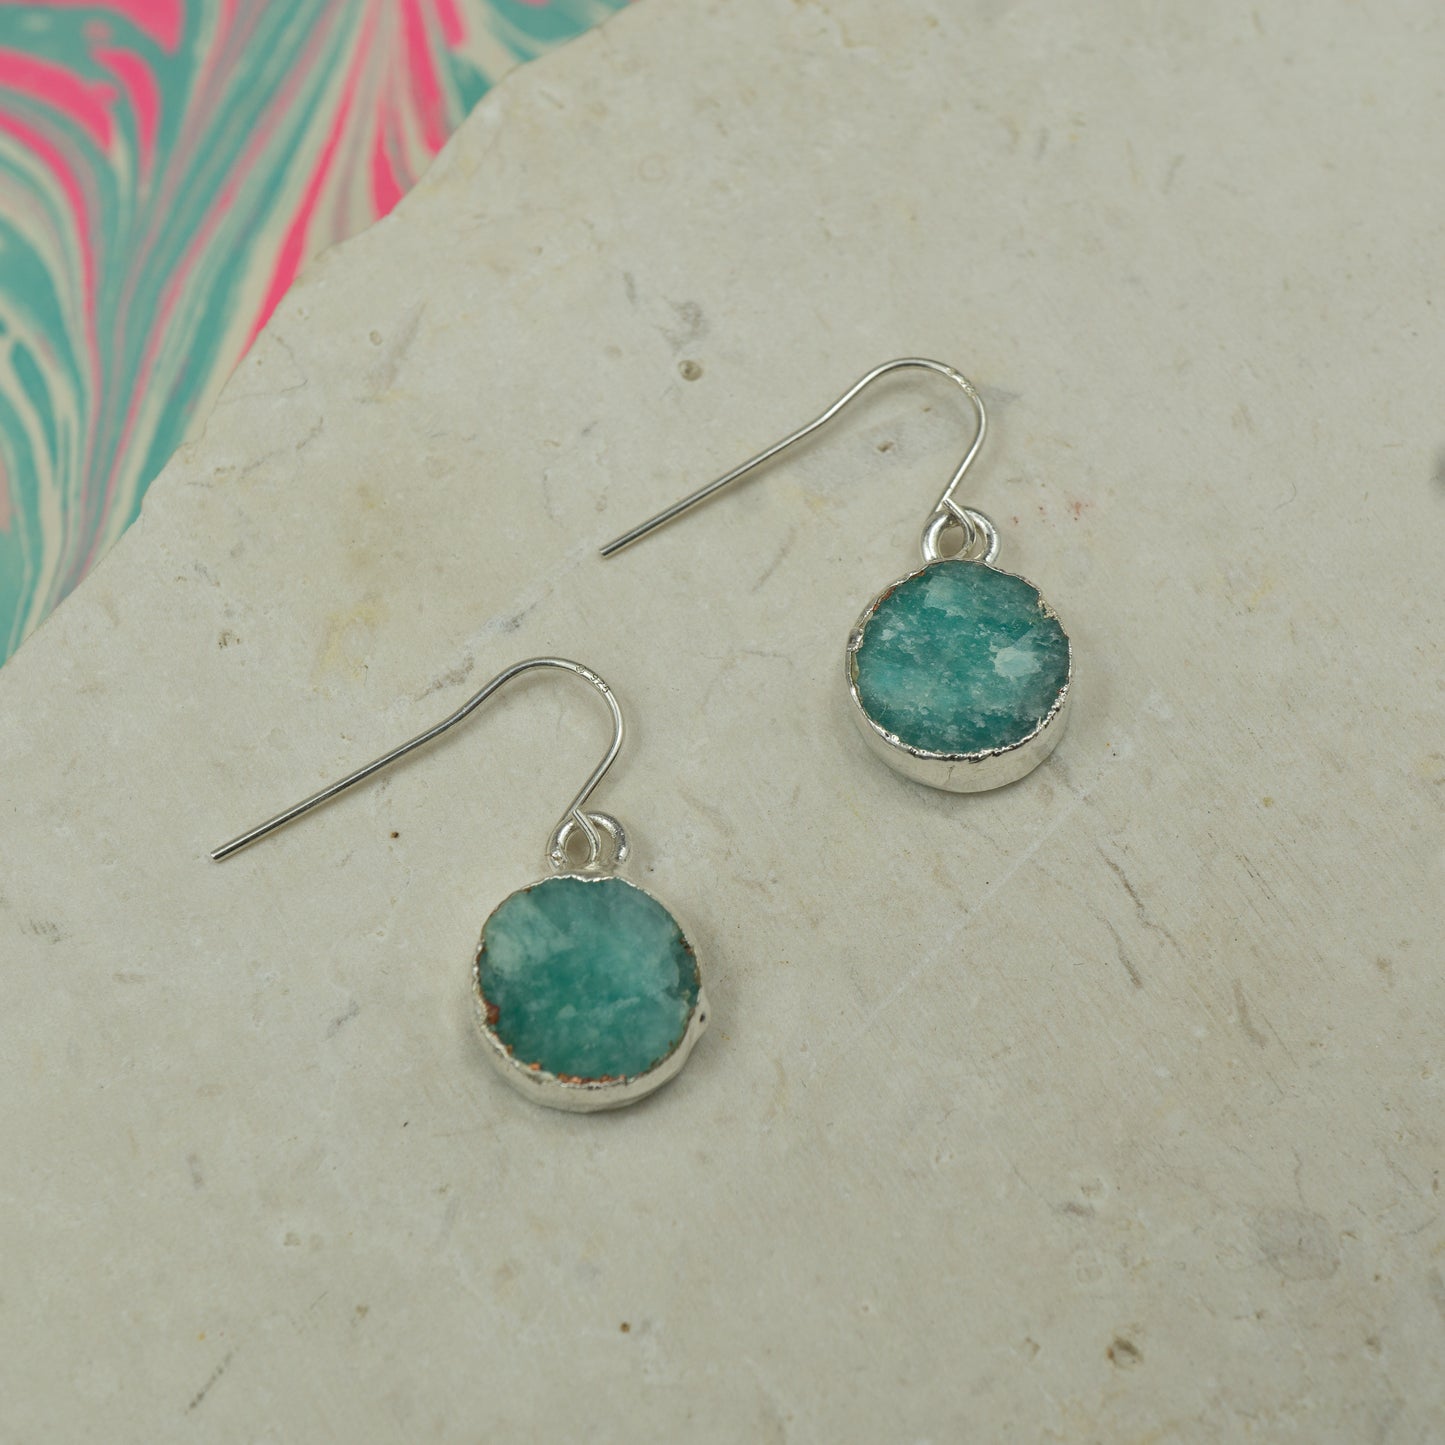 Round raw Blue amazonite earrings on hooks finished in silver.